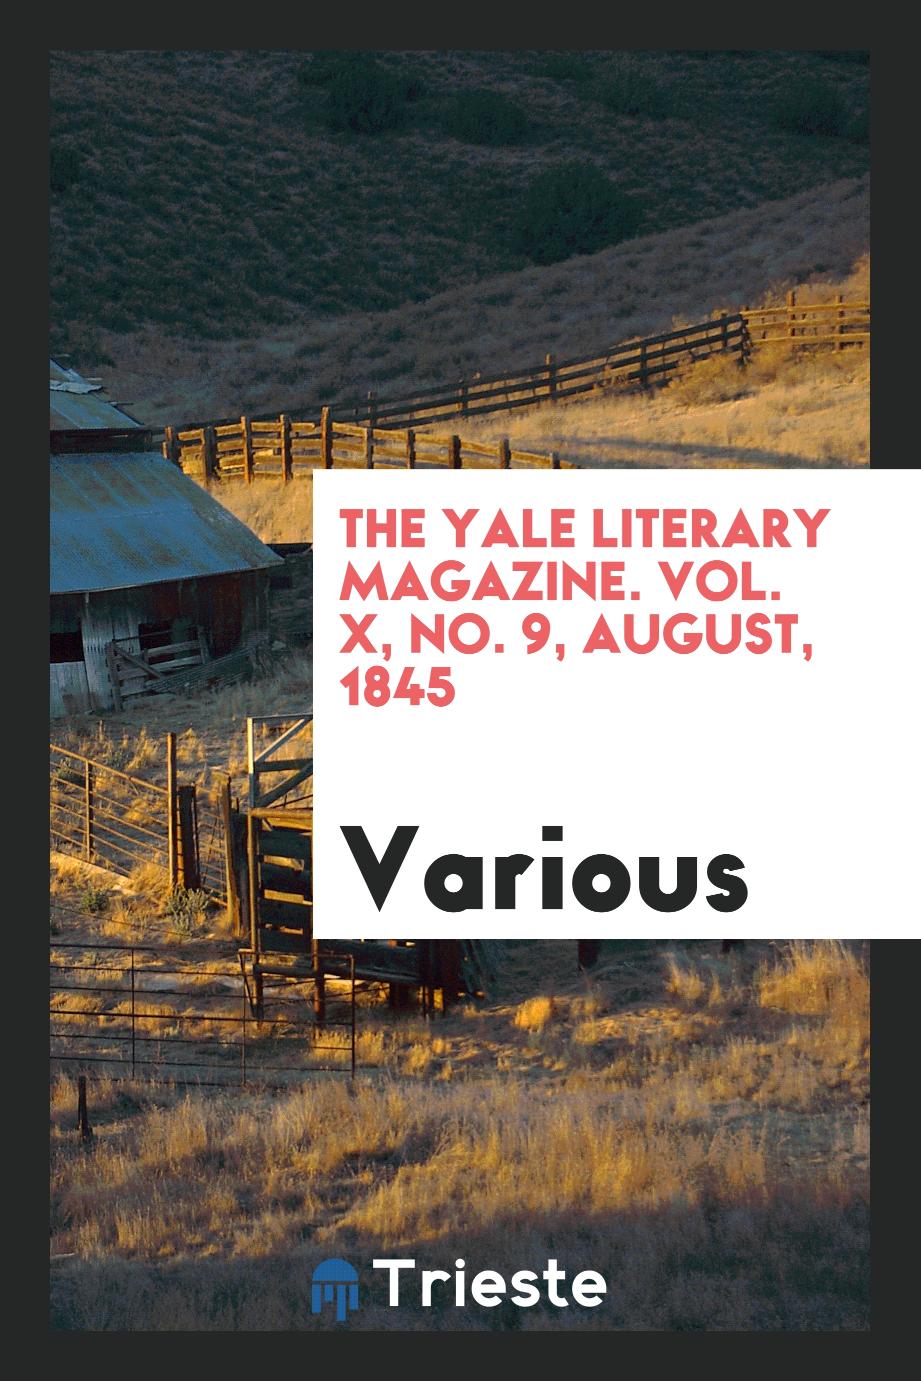 The Yale literary magazine. Vol. X, No. 9, August, 1845